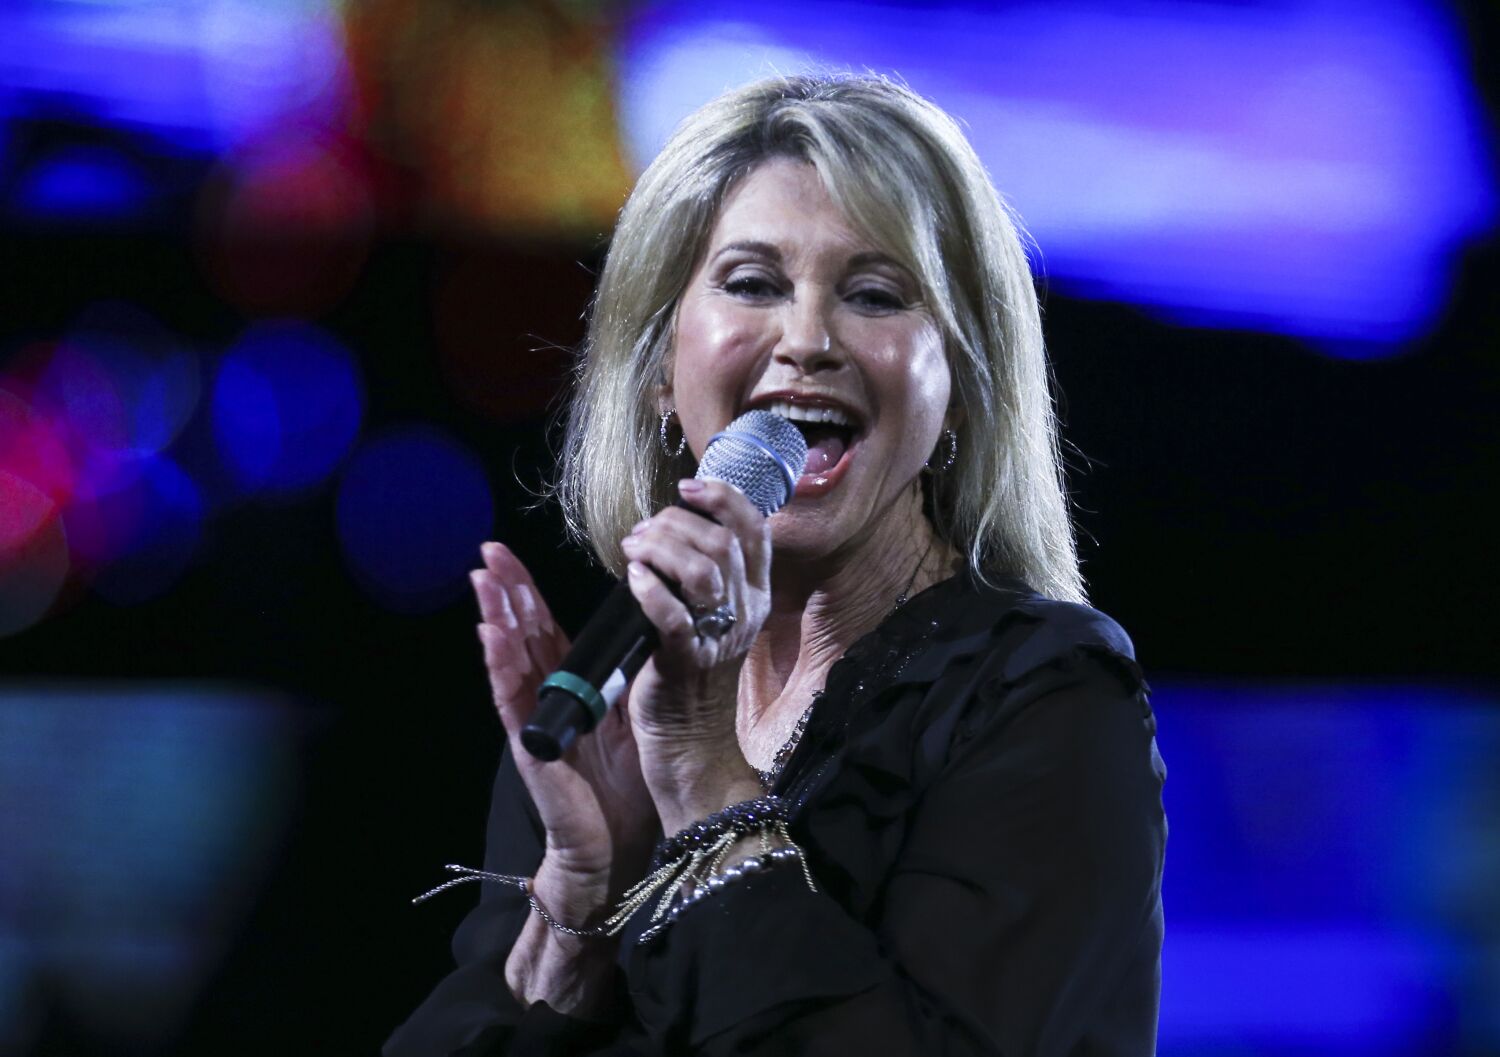 As Olivia Newton-John's 'Jolene' duet with Dolly Parton drops, daughter shares last words